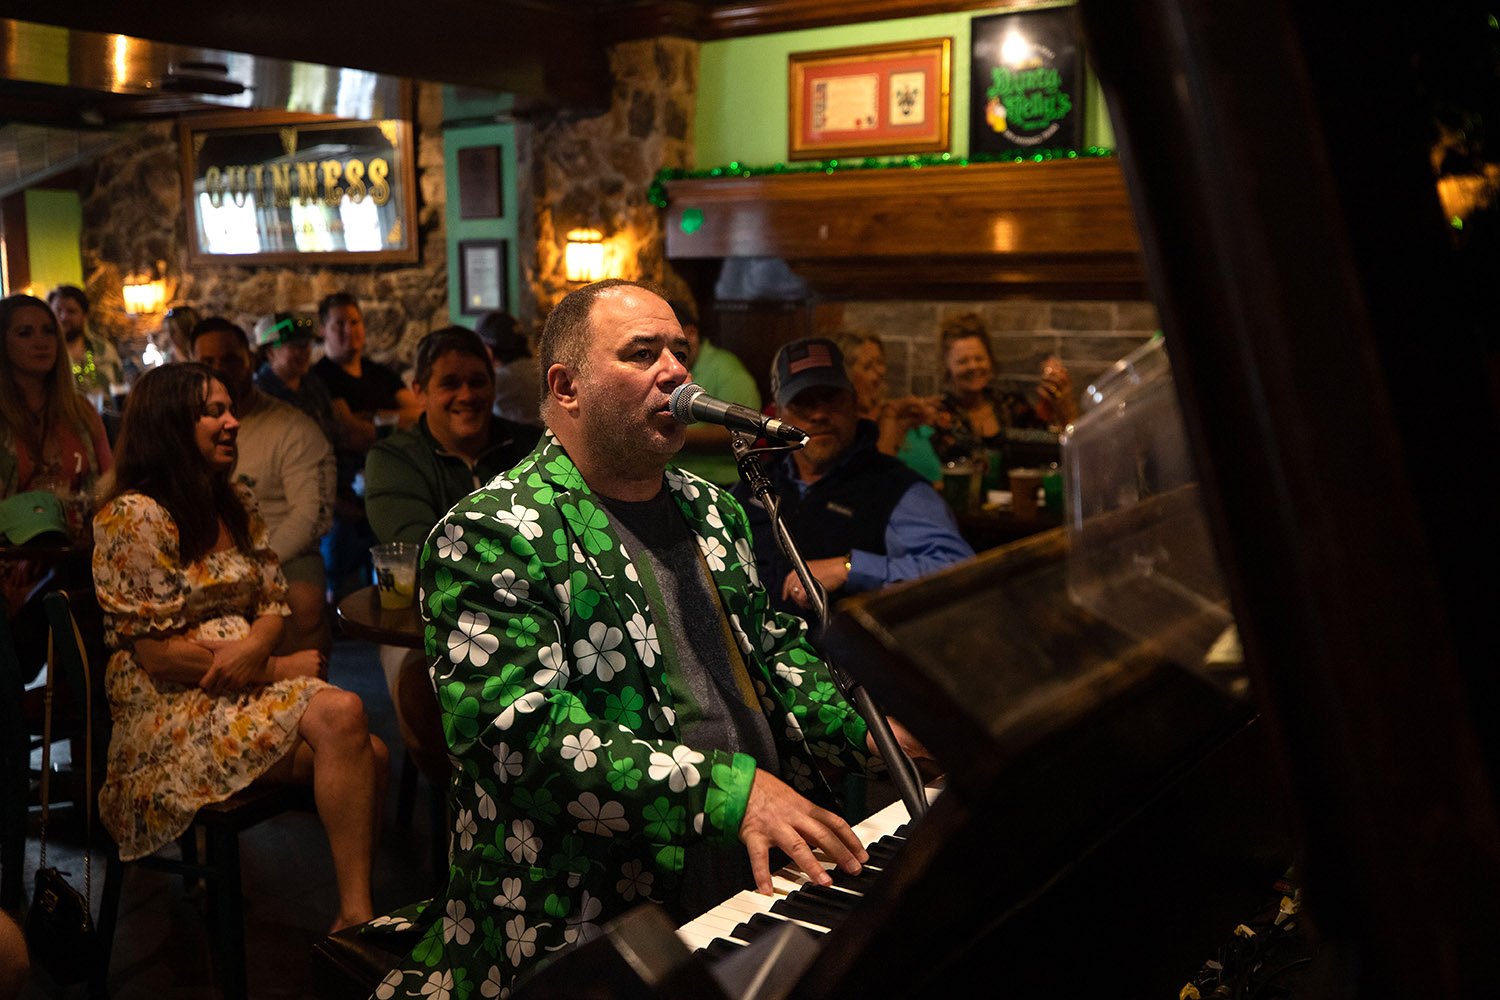 A pianist performs at a packed Dirty Nelly’s Irish Pub in downtown San Antonio, Texas, on Thursday, March 17, 2022. Photo by Kaylee Greenlee Beal | @kgreenleephoto | Heron contributor